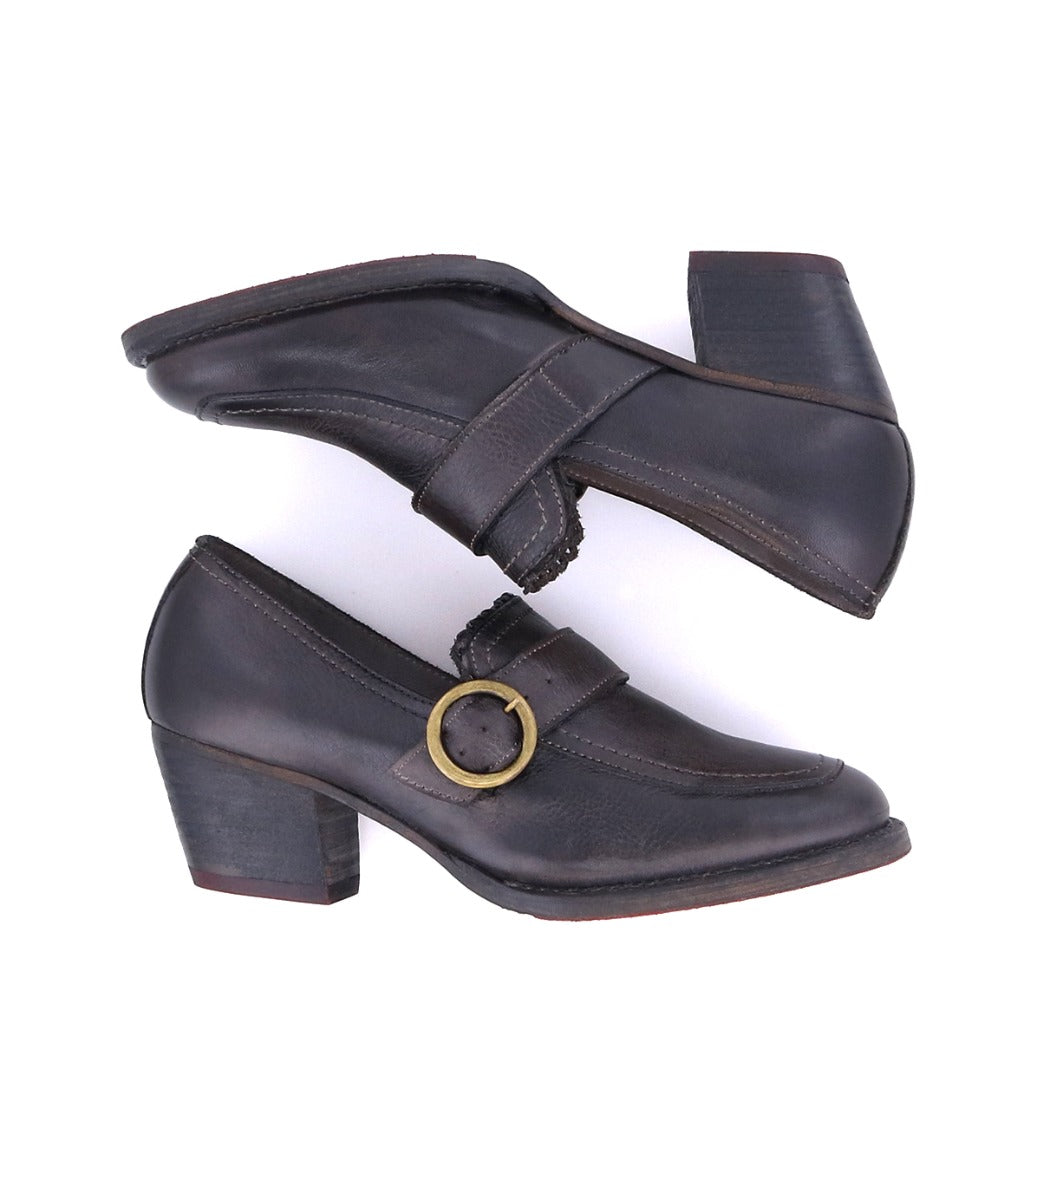 A pair of black leather Dyba shoes with a gold buckle, designed as heeled loafers for the fashion-savvy Diva, by Oak Tree Farms.